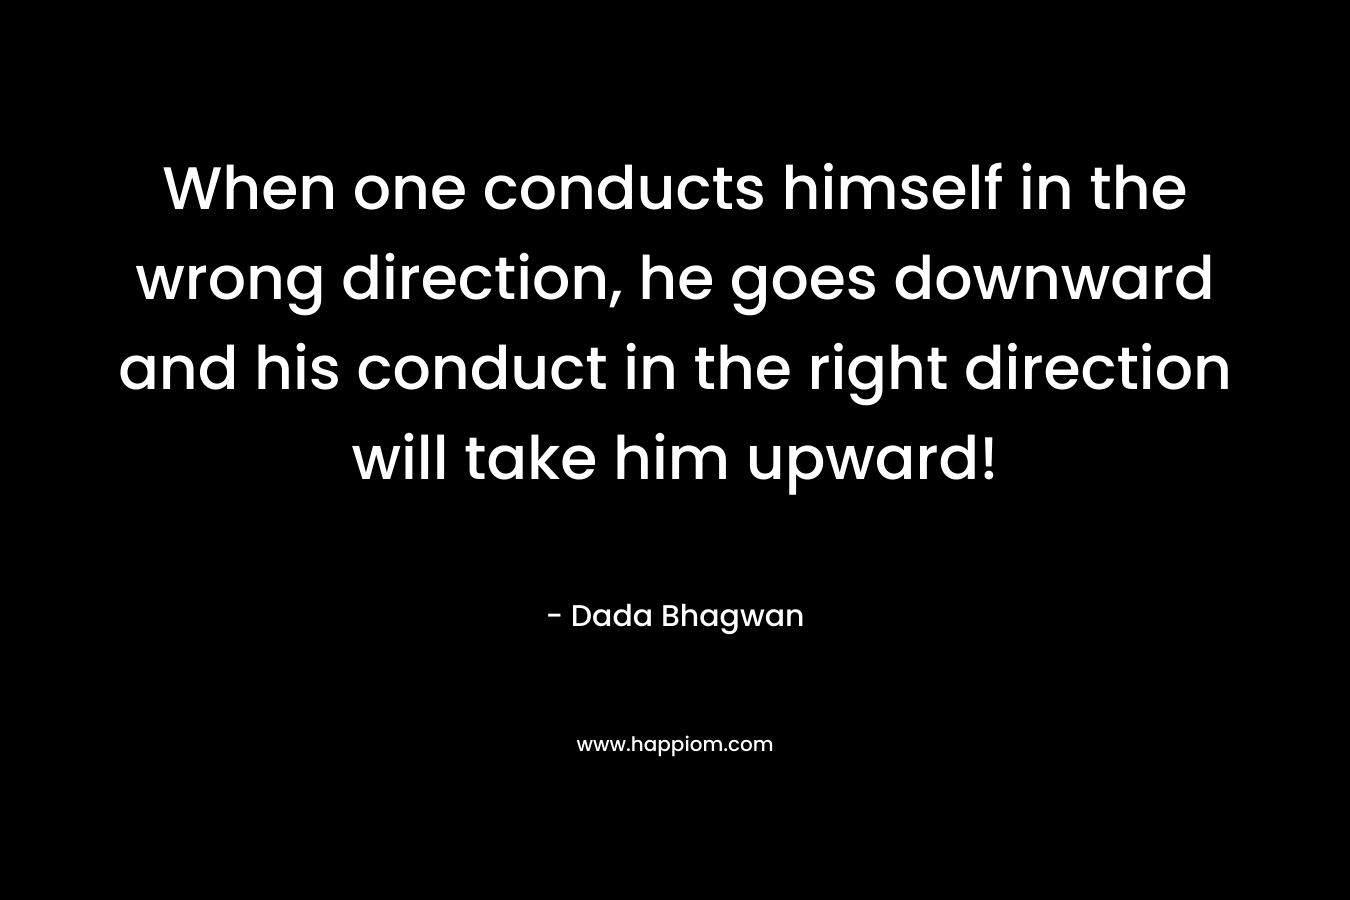 When one conducts himself in the wrong direction, he goes downward and his conduct in the right direction will take him upward!